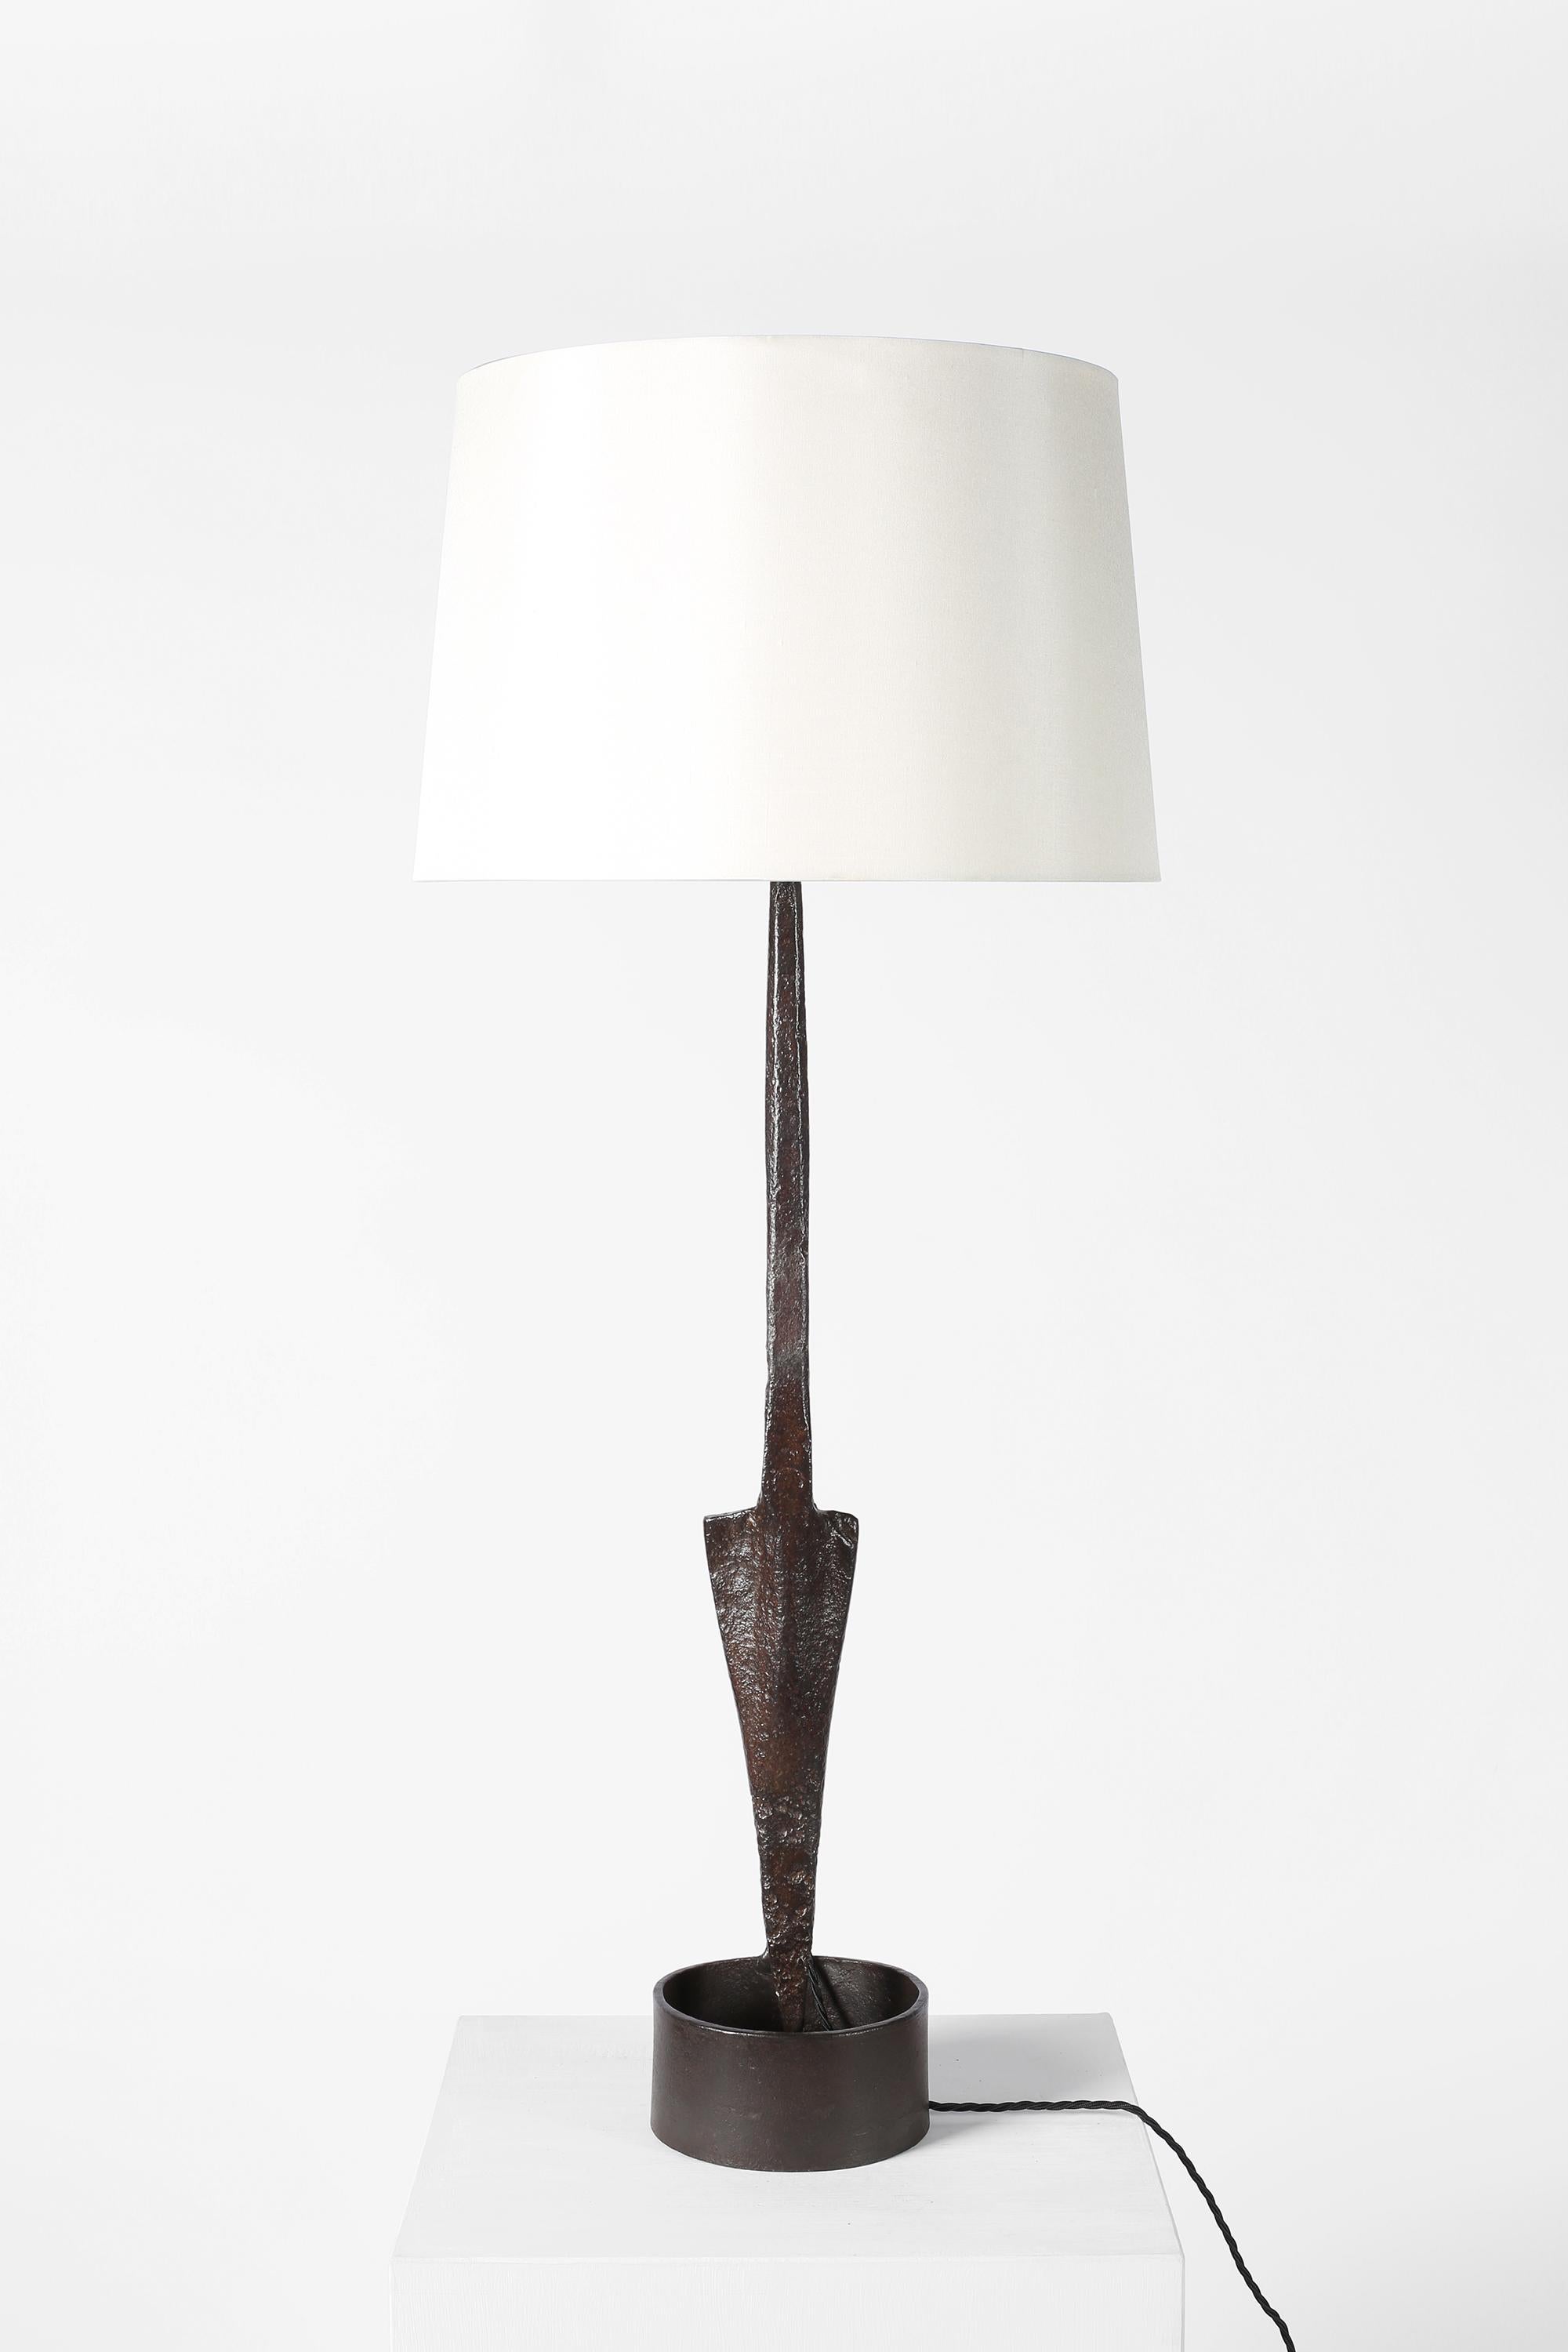 A large forged iron table lamp formed from an antique spear head, typical folk-art work of the Provence region. French, c. 1950s. Supplied with an off-white dupion silk shade.